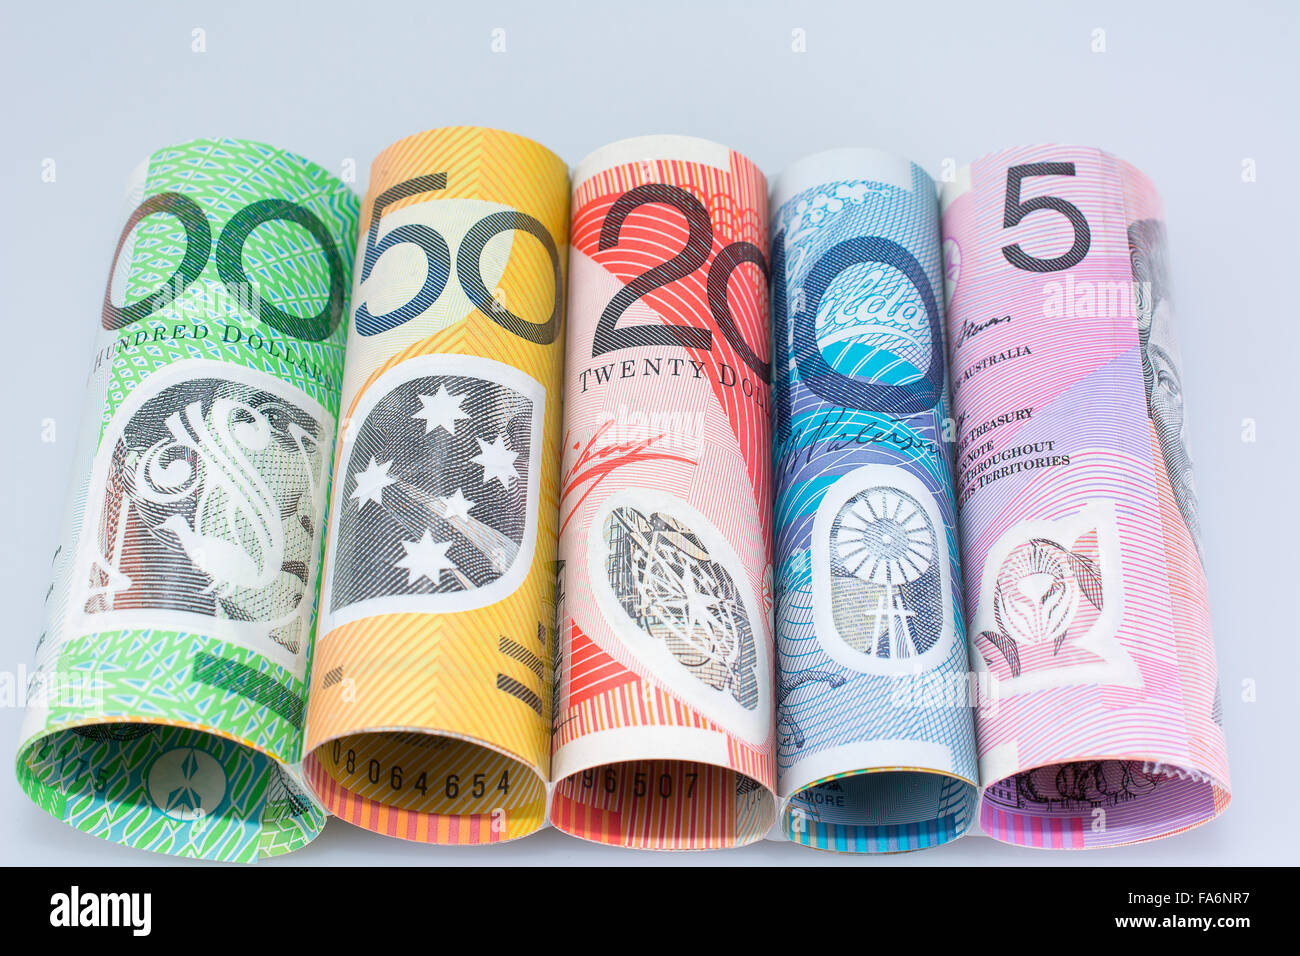 Rolled Up Australian Banknotes All Denominations Currency Money Stock Photo